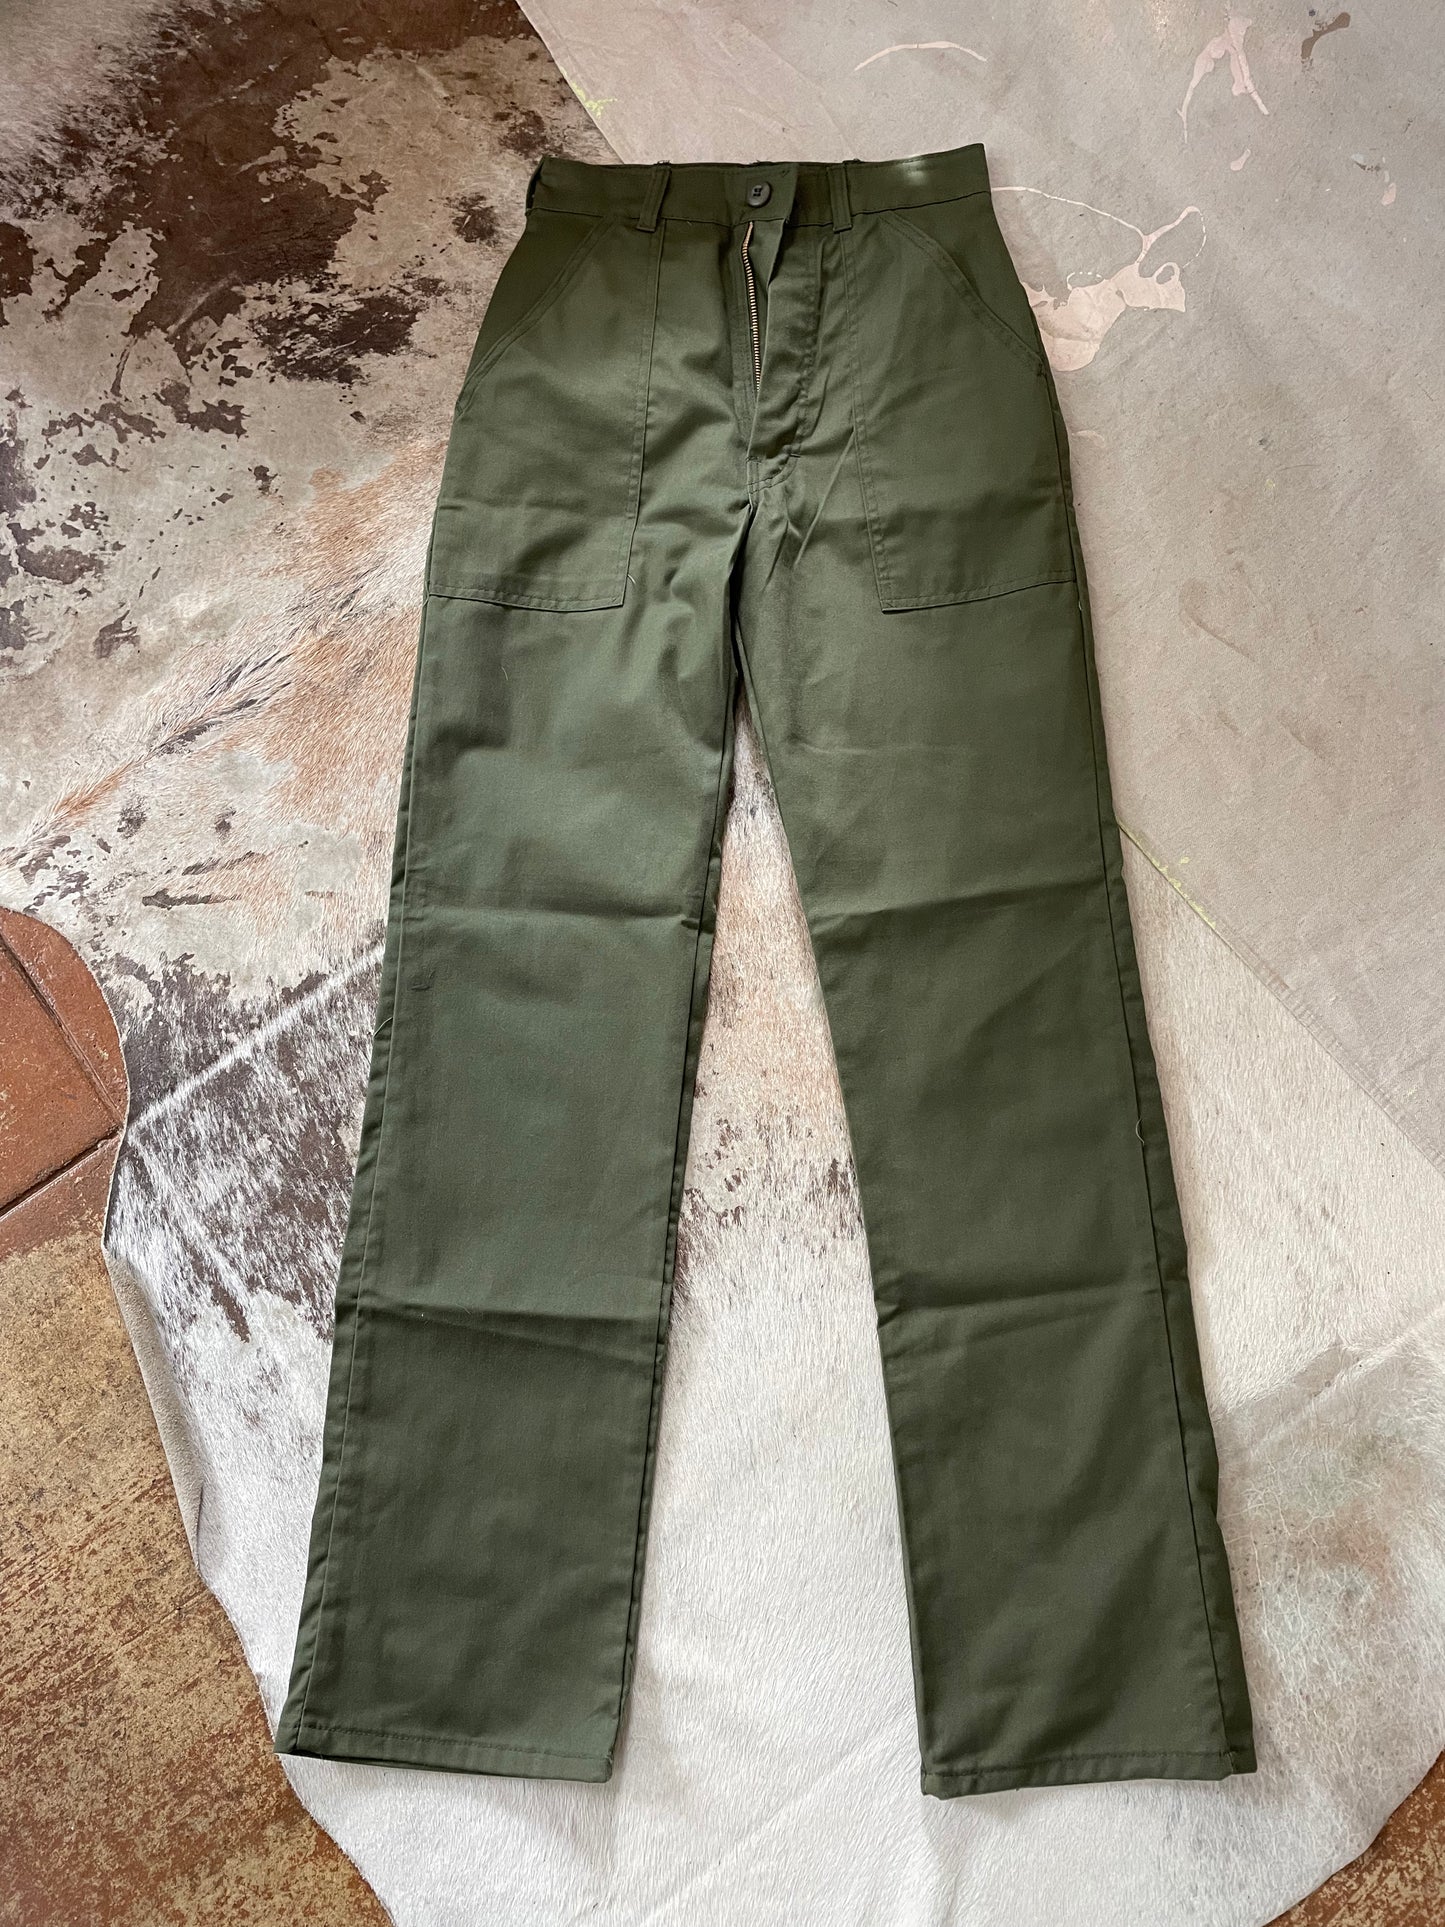 70s Army Fatigues